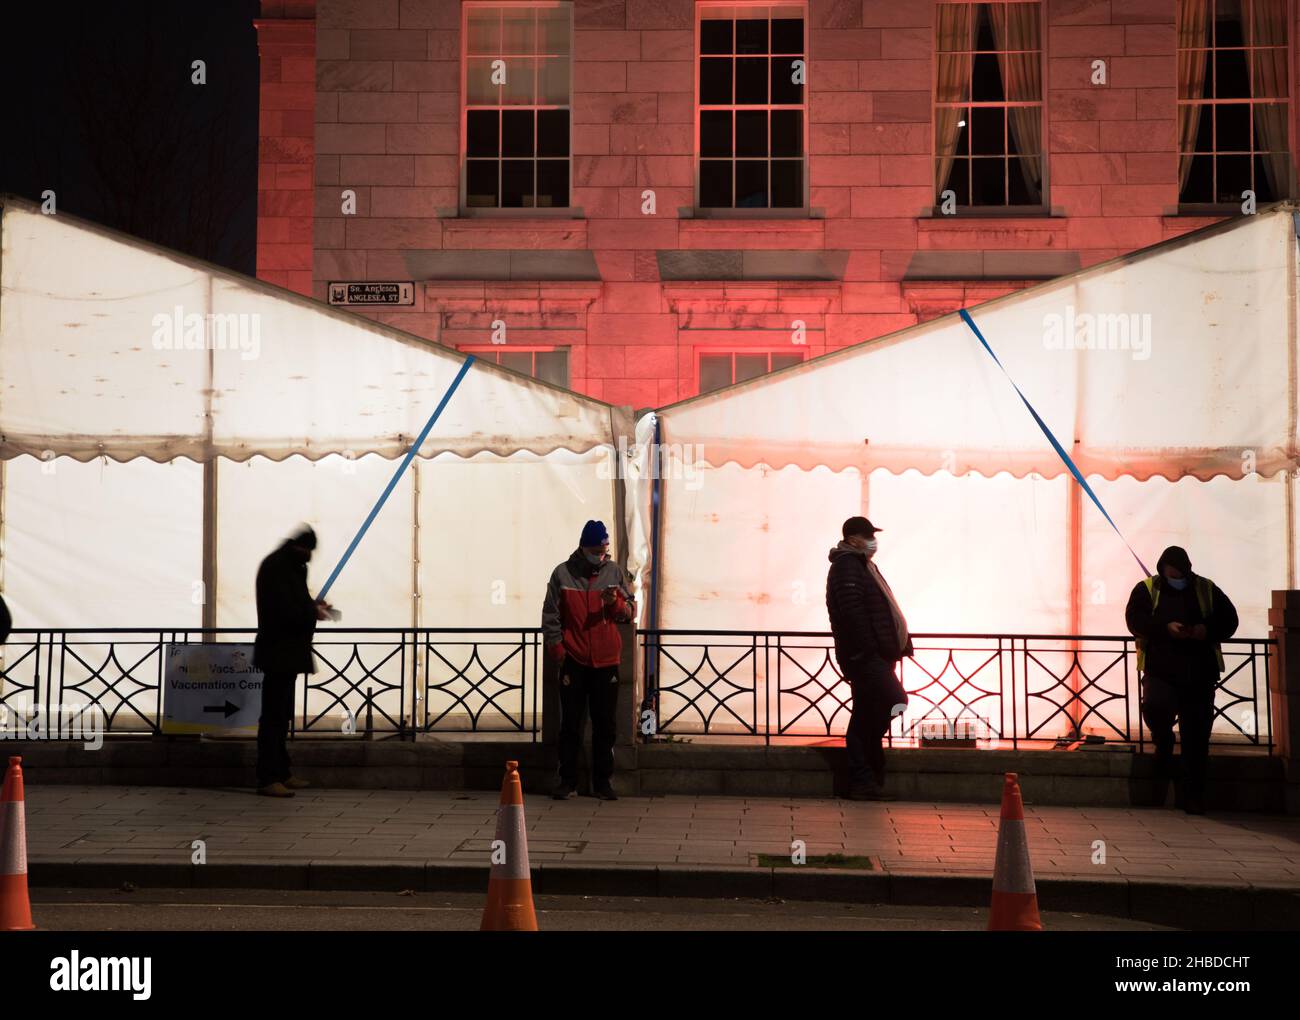 Cork, Ireland. 19th December, 2021. On the first day where over forties could get their booster shots Queues formed at about 6.00am on Anglesea Street, two hours before jabs were due to begin at the City Hall, Cork, Ireland. - Credit; David Creedon / Alamy Live News Stock Photo